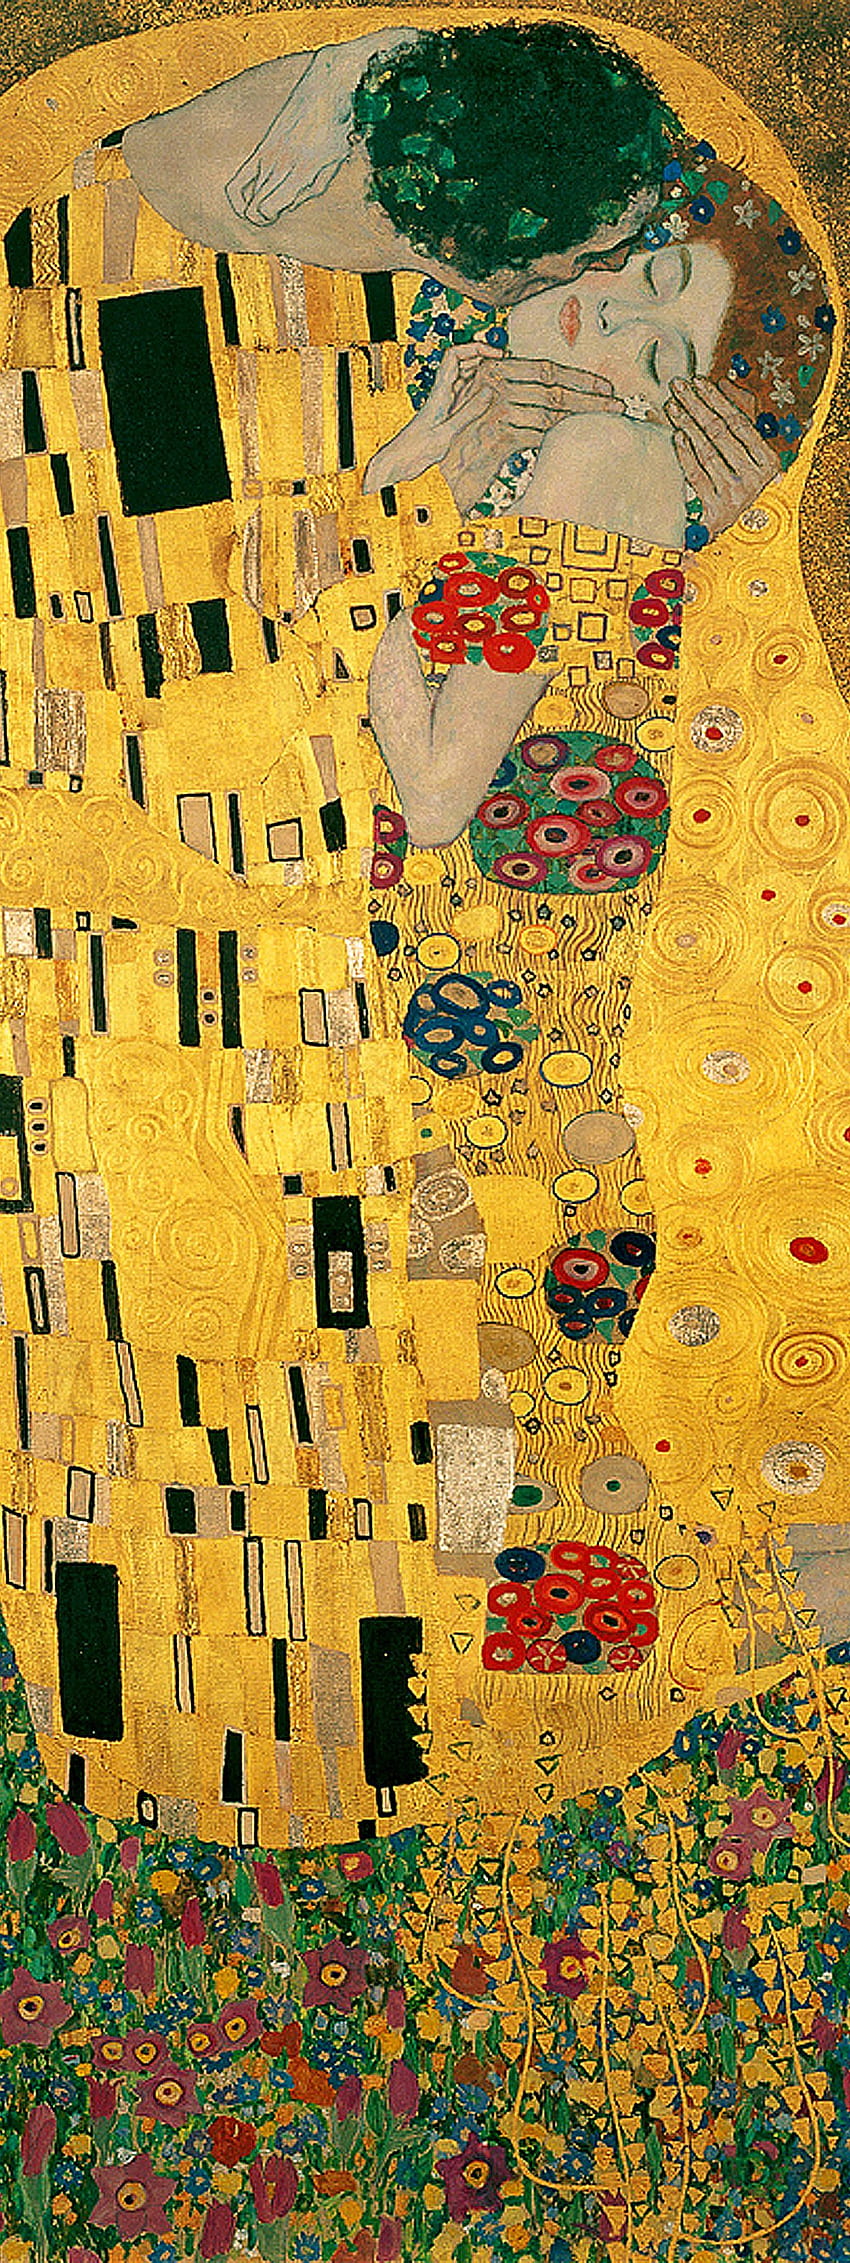 The important facts you need to know about Gustav Klimt's 'The Kiss' |  British GQ